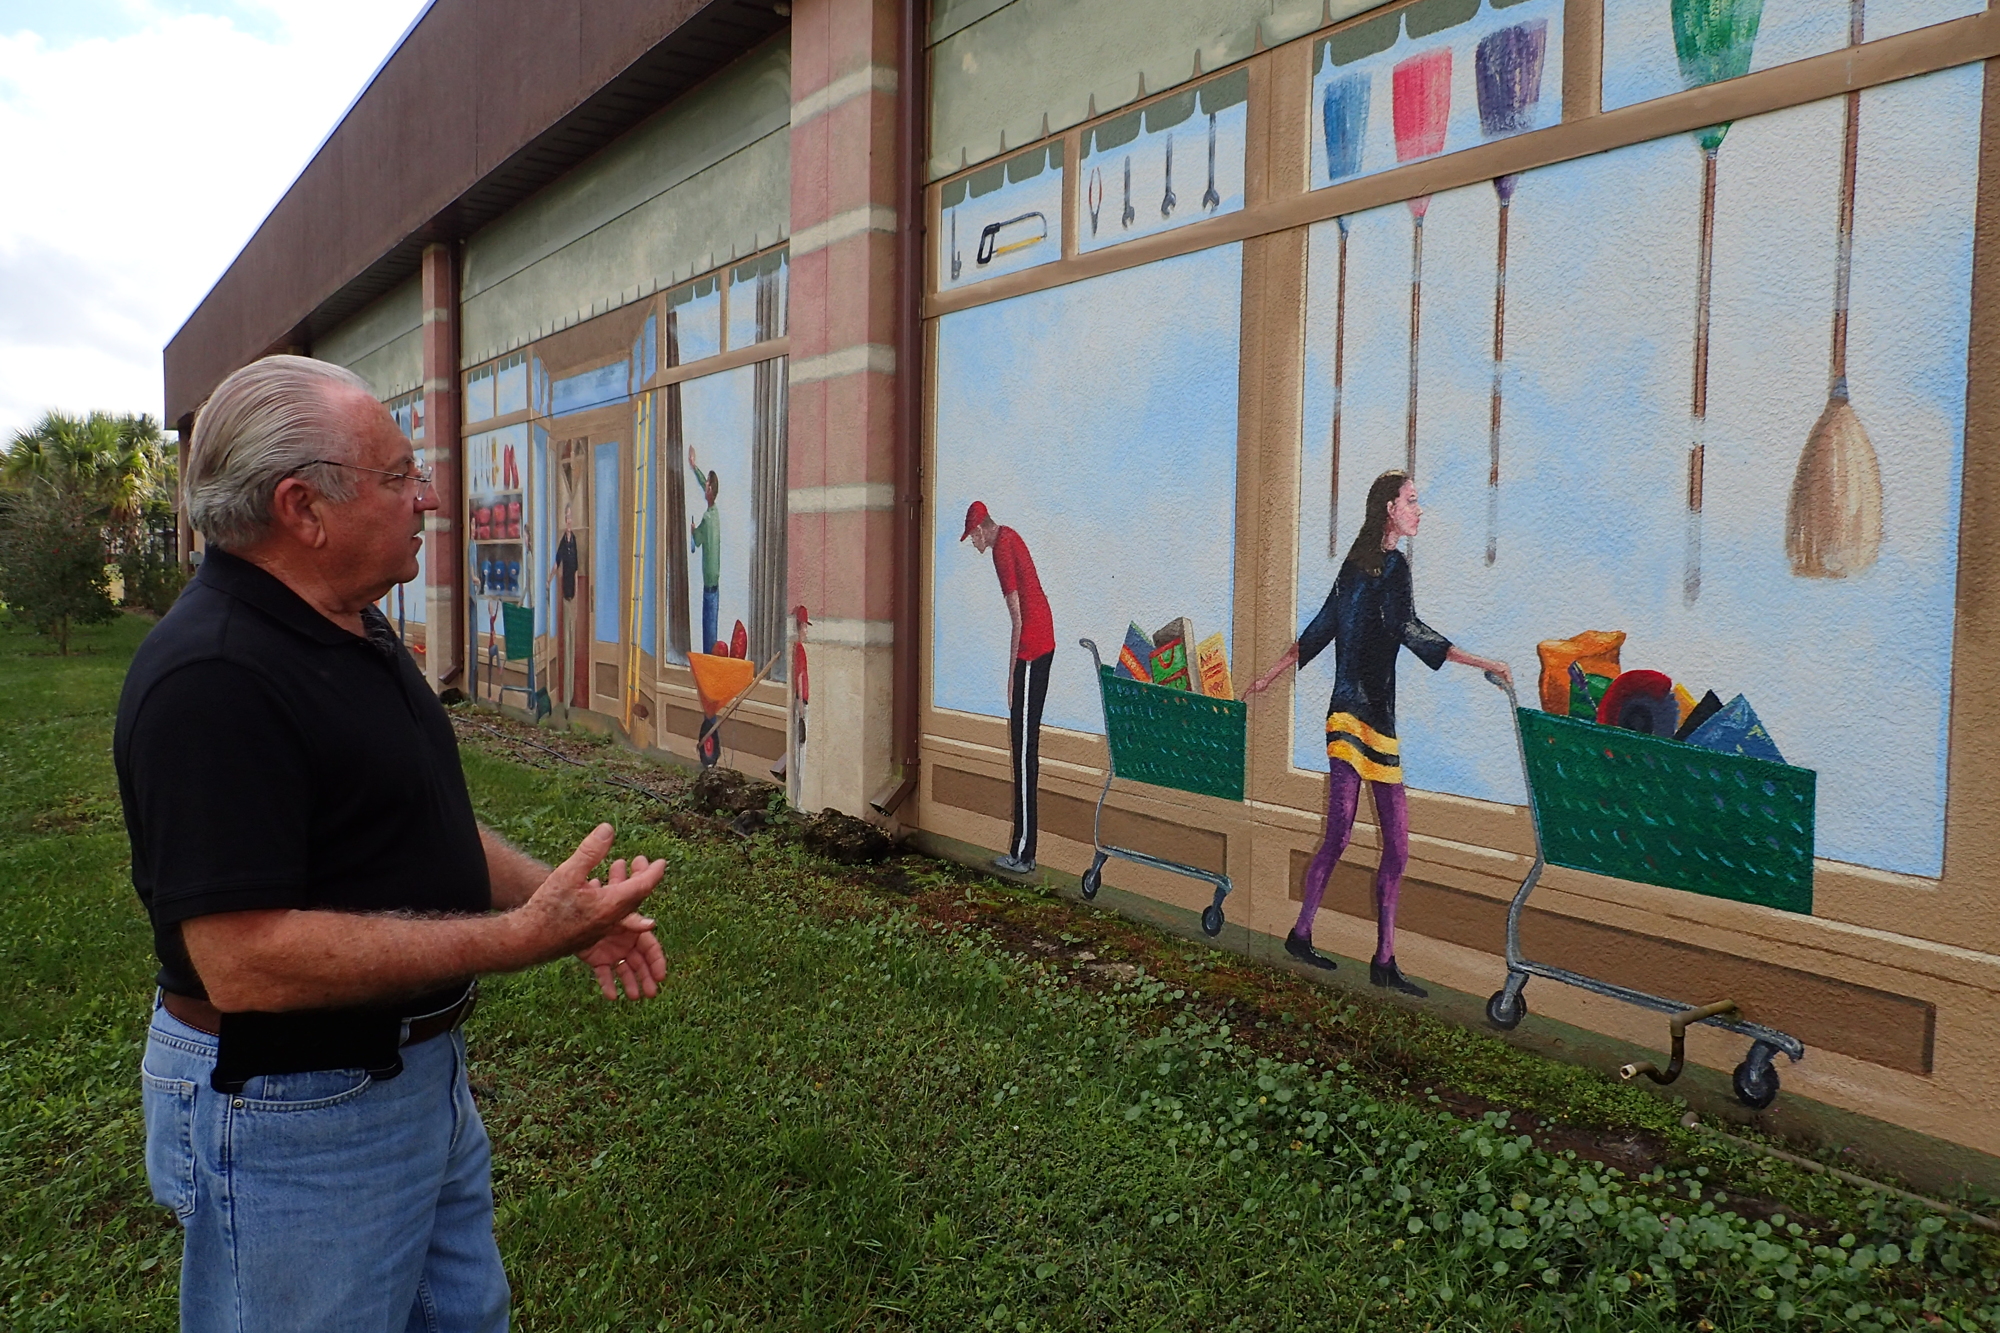 Al Bavry, owner of Kimal Hardware on Fruitville Road, looks over the murals that the county says violate codes by advertising the business.